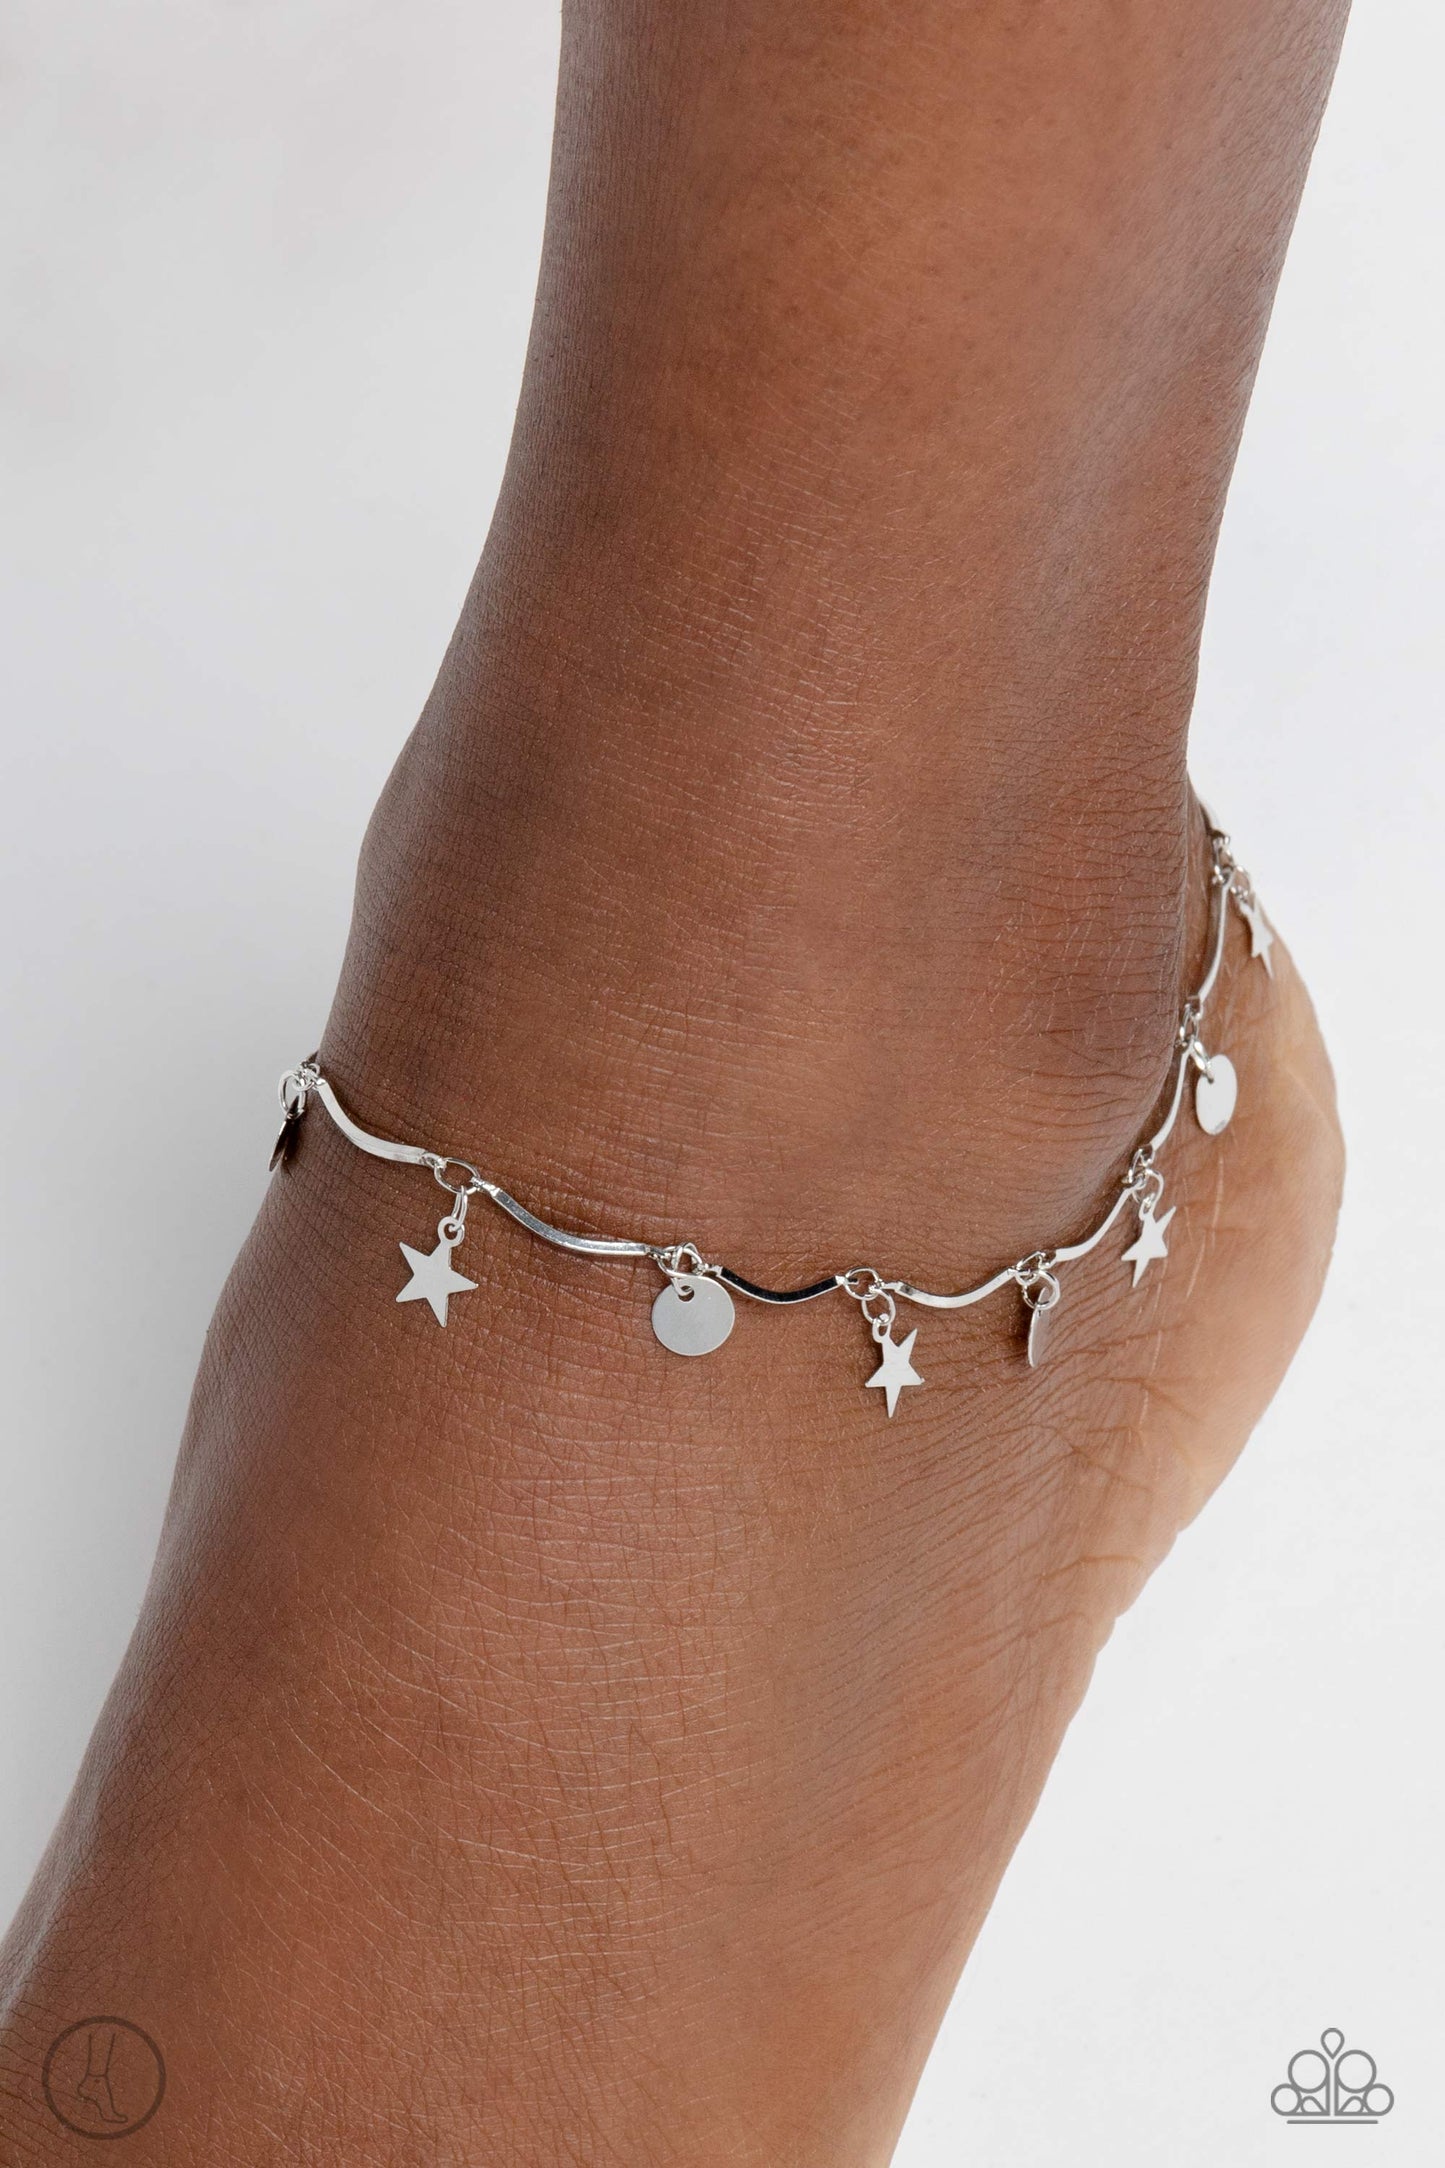 BEACH You To It - Silver Anklet - Paparazzi Accessories - A fringe of sleek silver stars and discs swings from a dainty silver overlay chain, creating whimsical movement around the ankle. Features an adjustable clasp closure. Sold as one individual anklet.